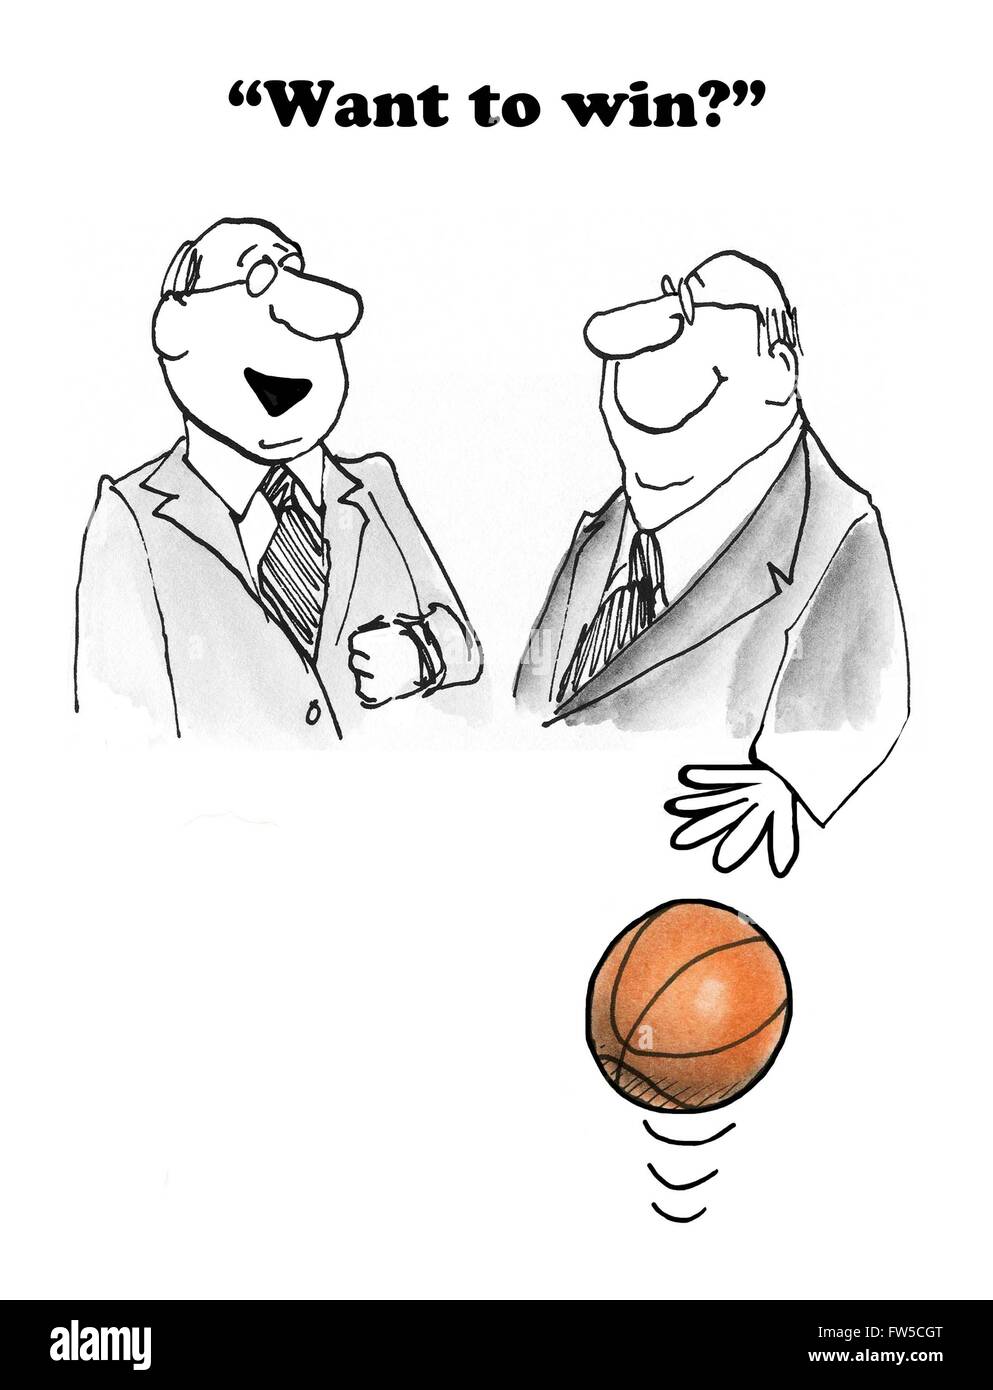 Business cartoon about wanting to win. Stock Photo